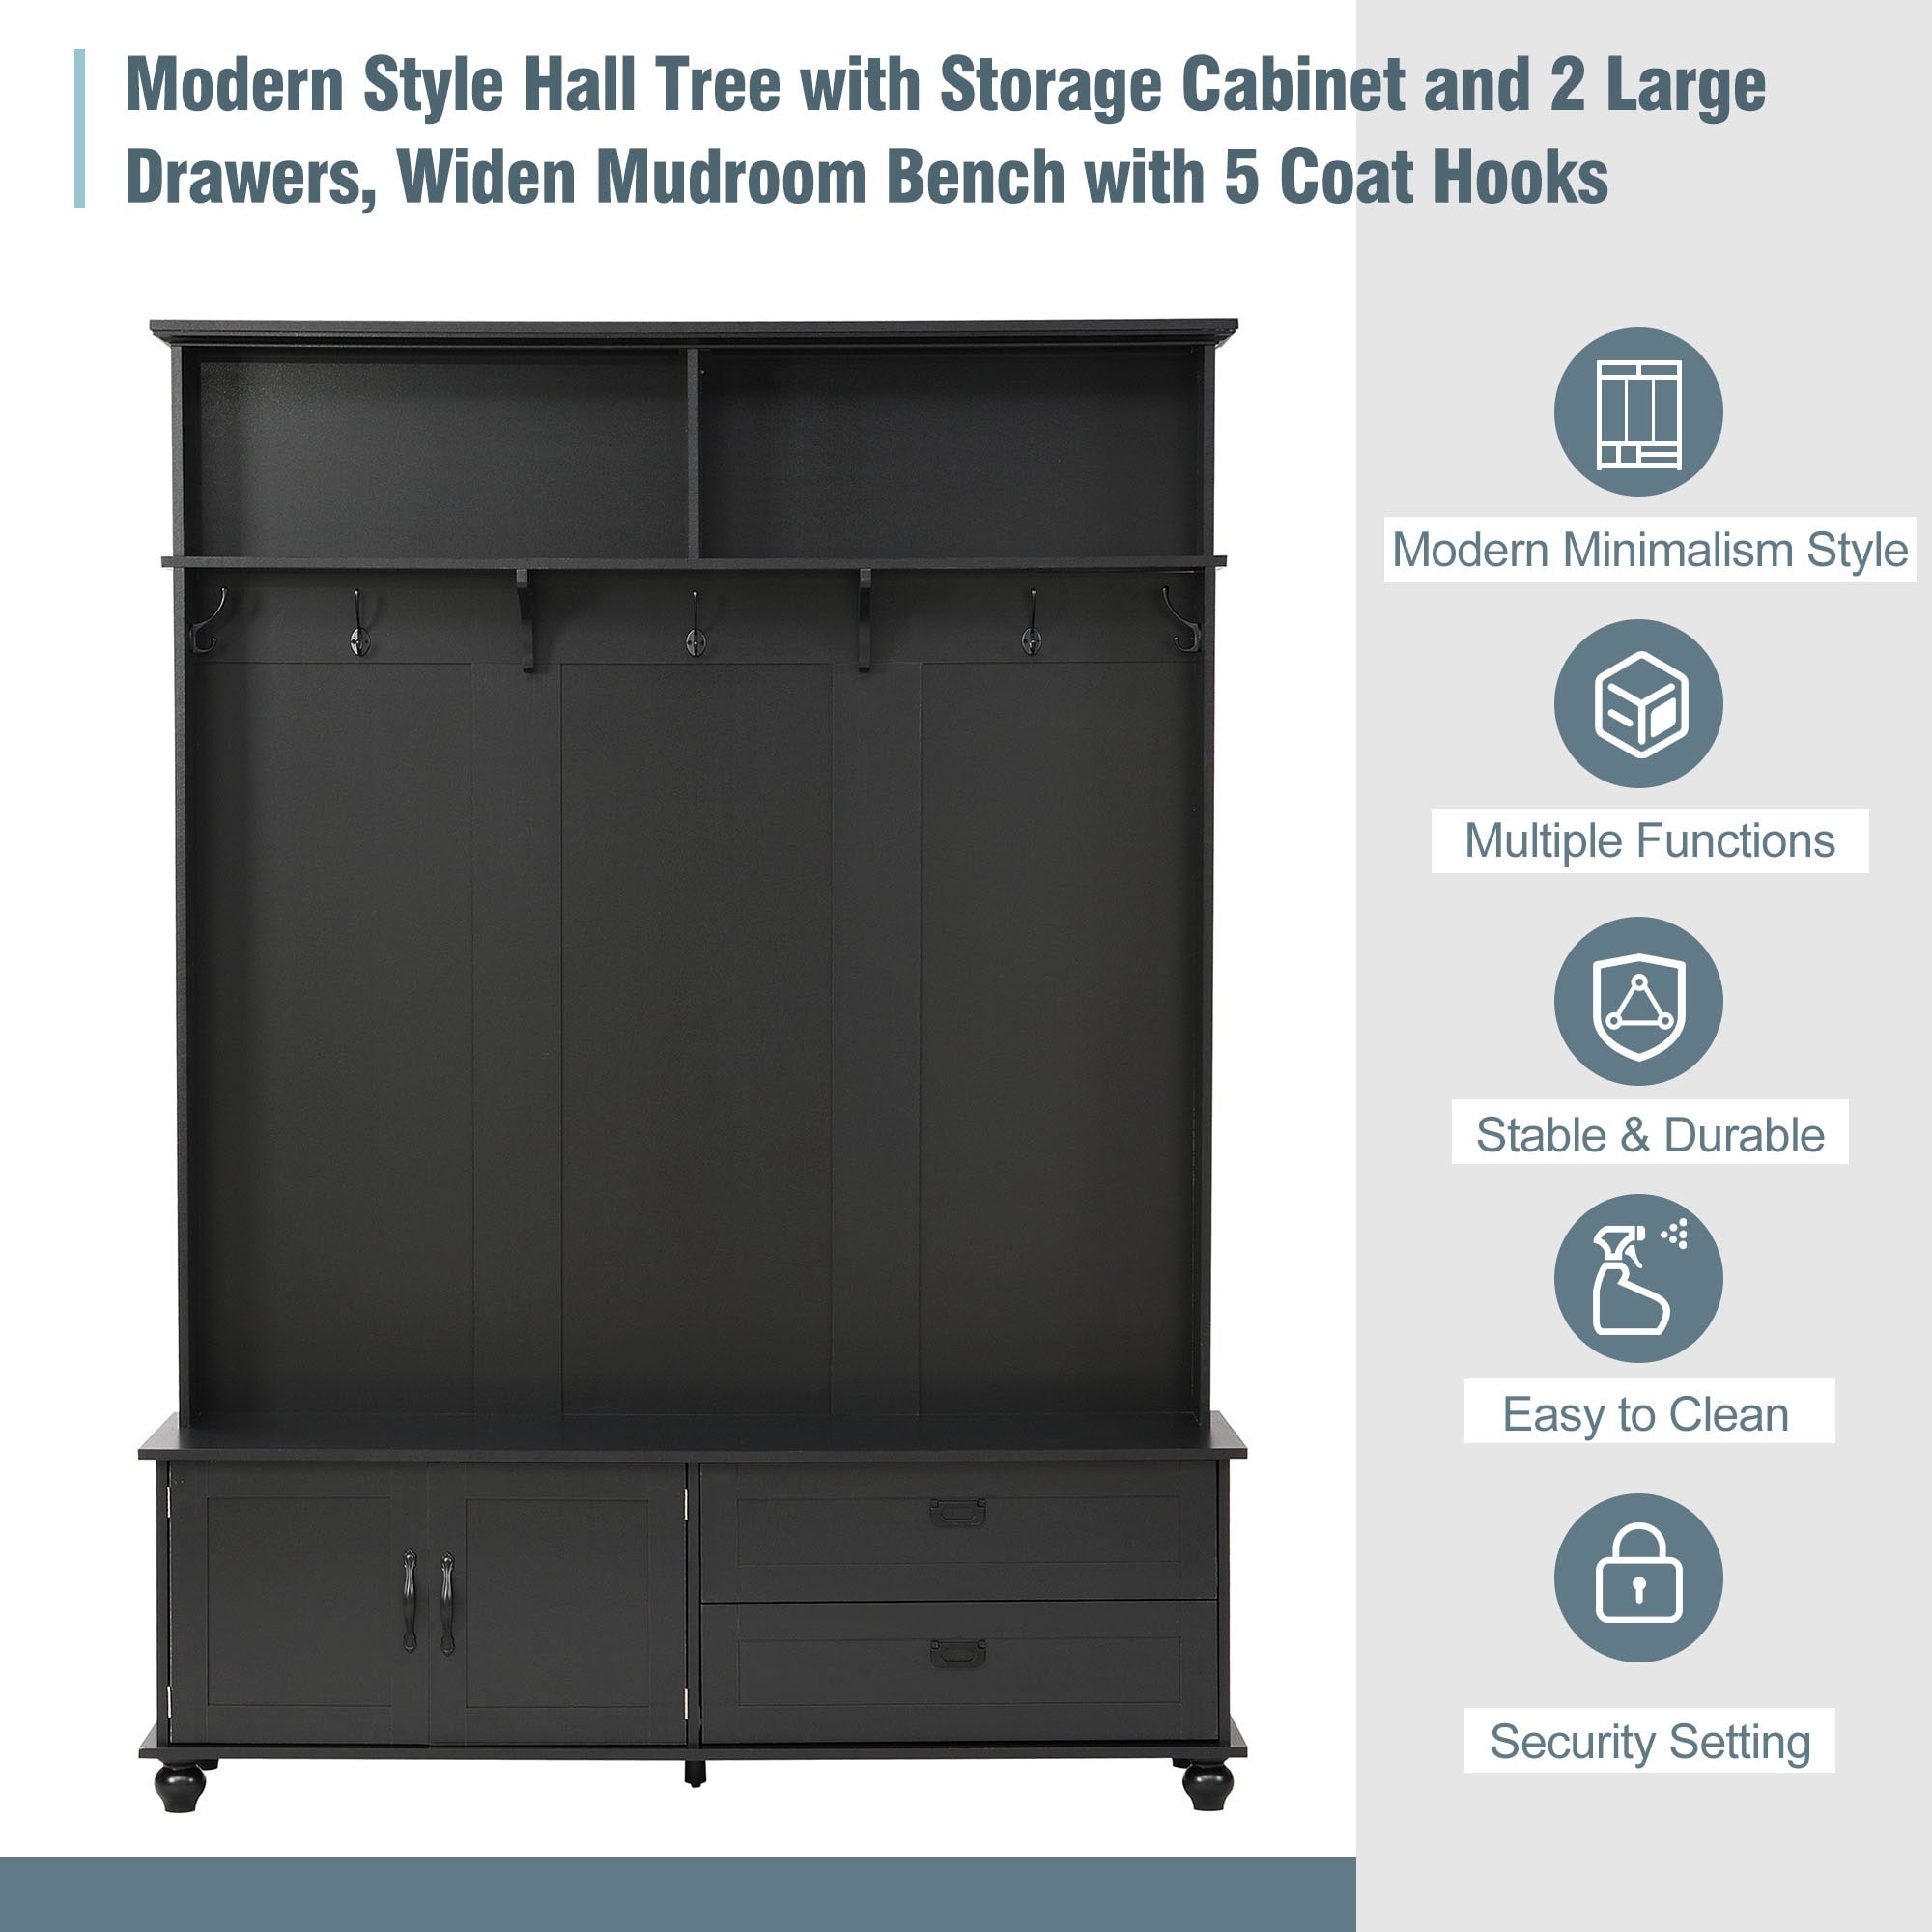 https://ak1.ostkcdn.com/images/products/is/images/direct/19bd107b66cfa73eeb8336219437cfdc111815cf/Modern-Hall-Tree-with-Storage-Cabinet-and-2-Large-Drawers%2C-Mudroom-Bench-with-Storage-Shelf-and-5-Coat-Hooks.jpg